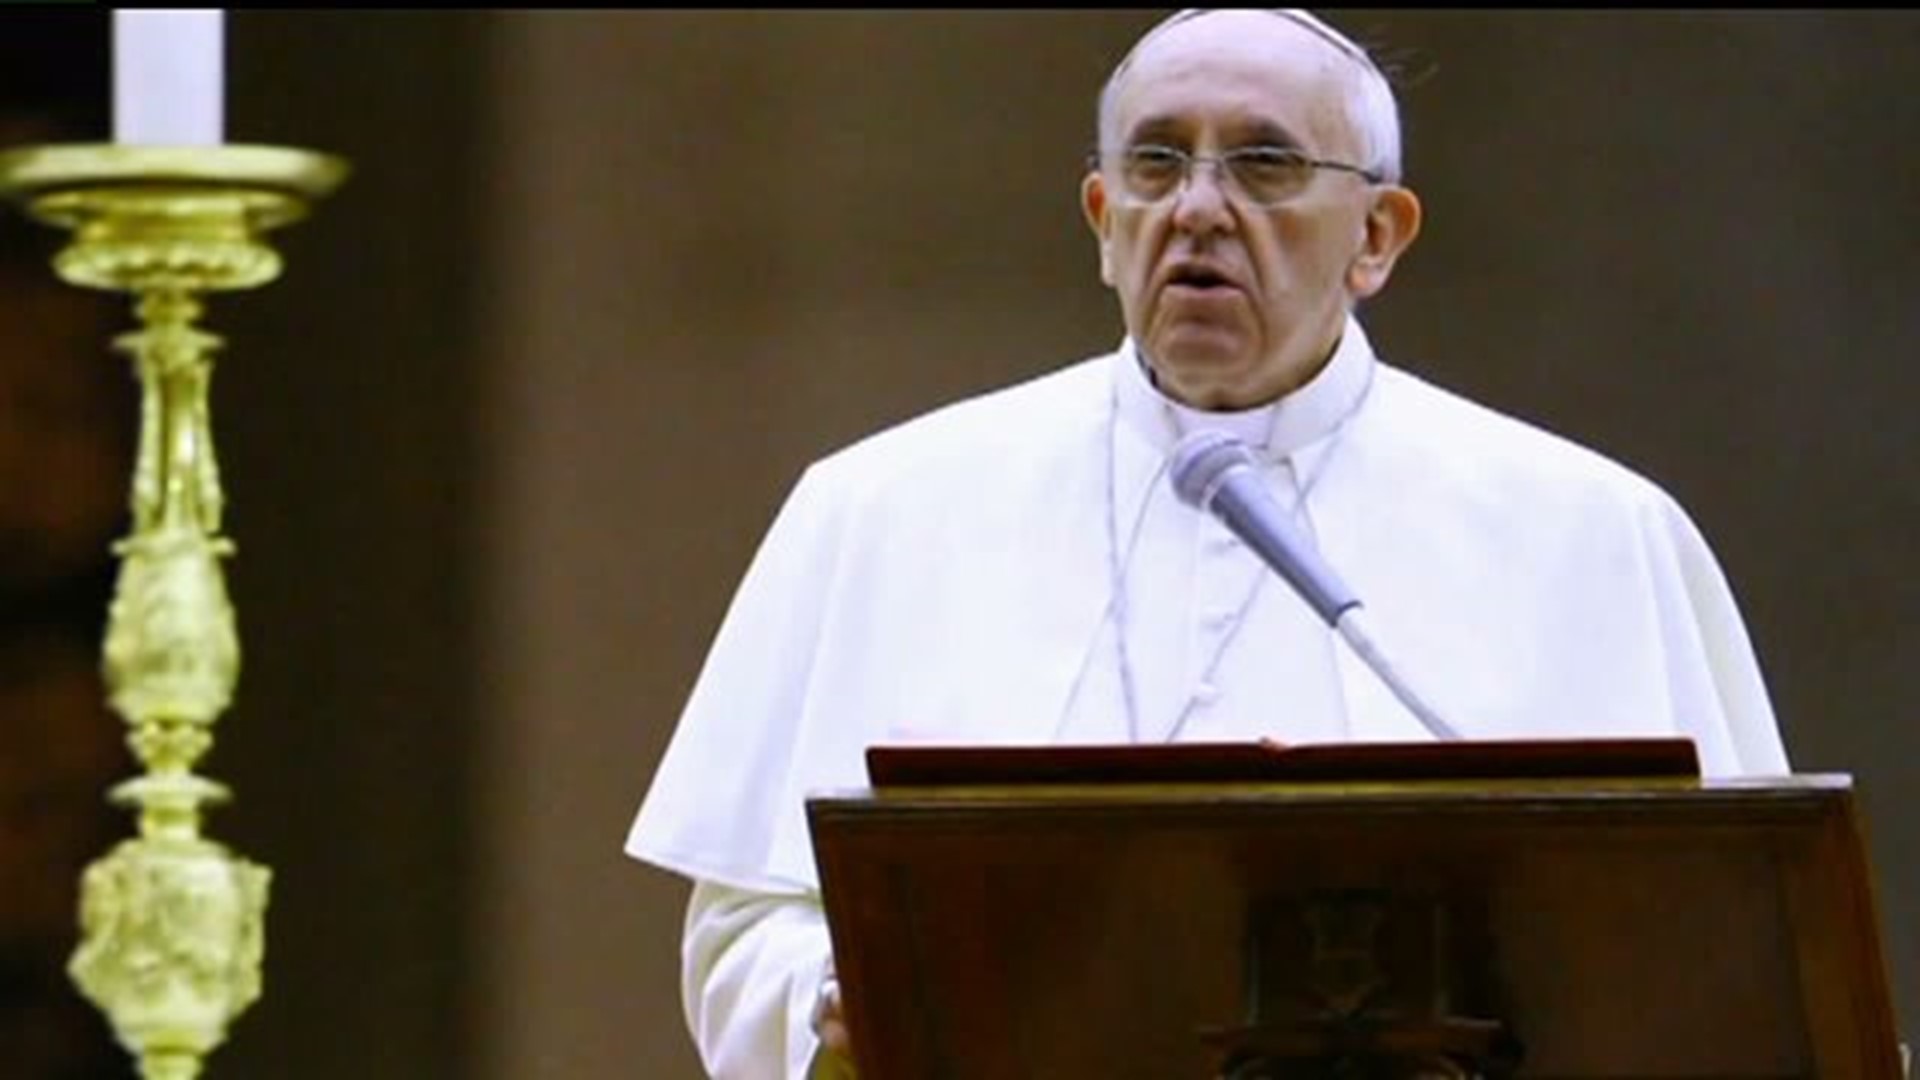 Pope Francis makes annulment of marriages cheaper and easier